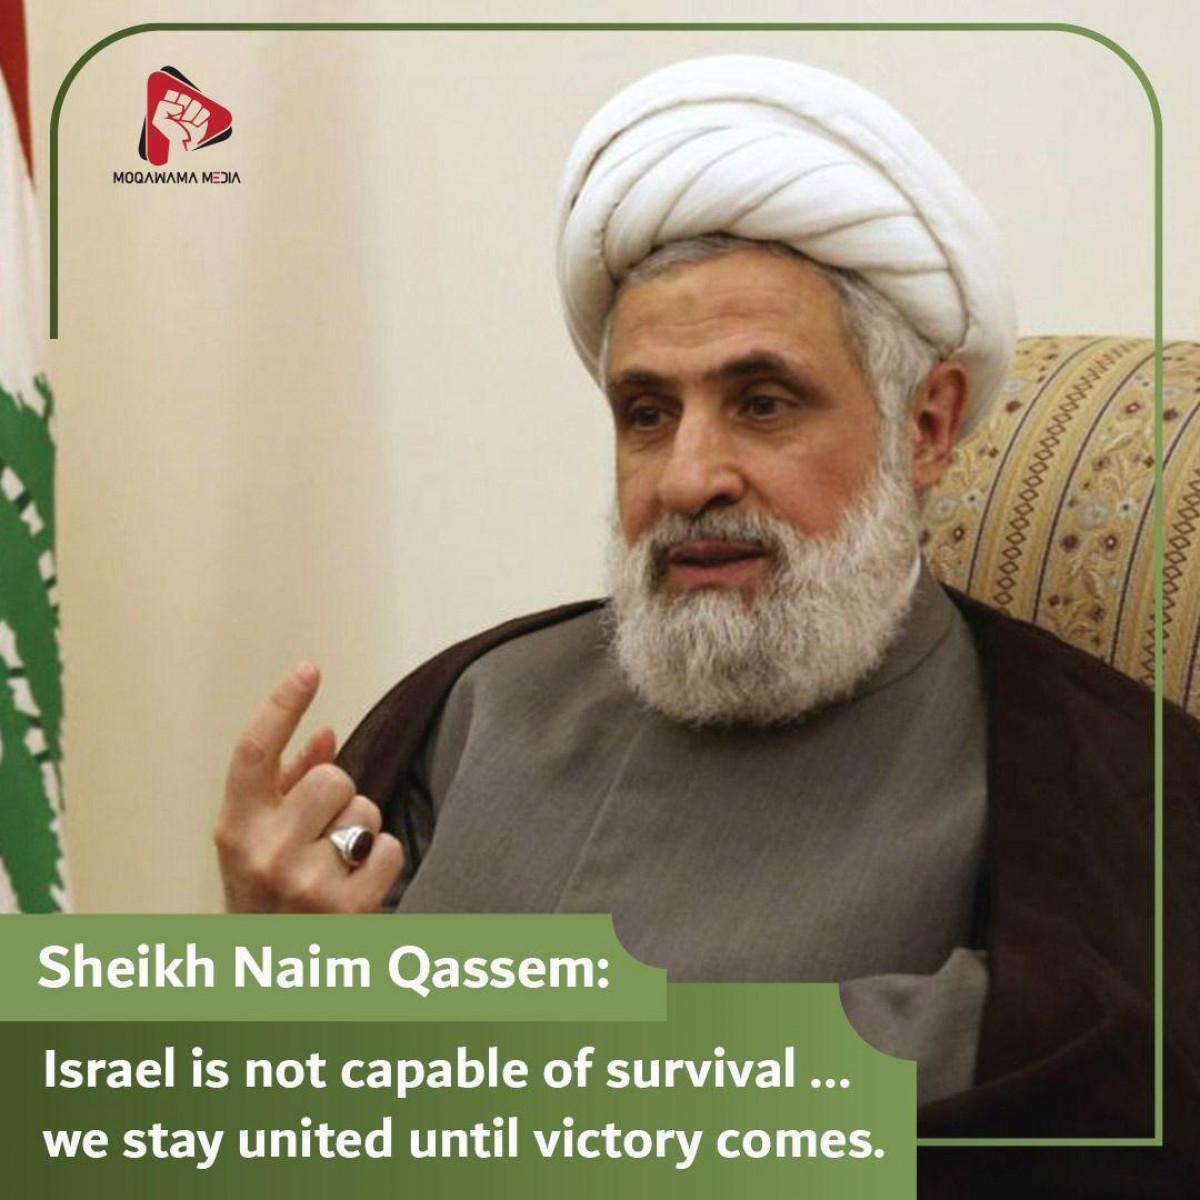 Israel is not capable of survival